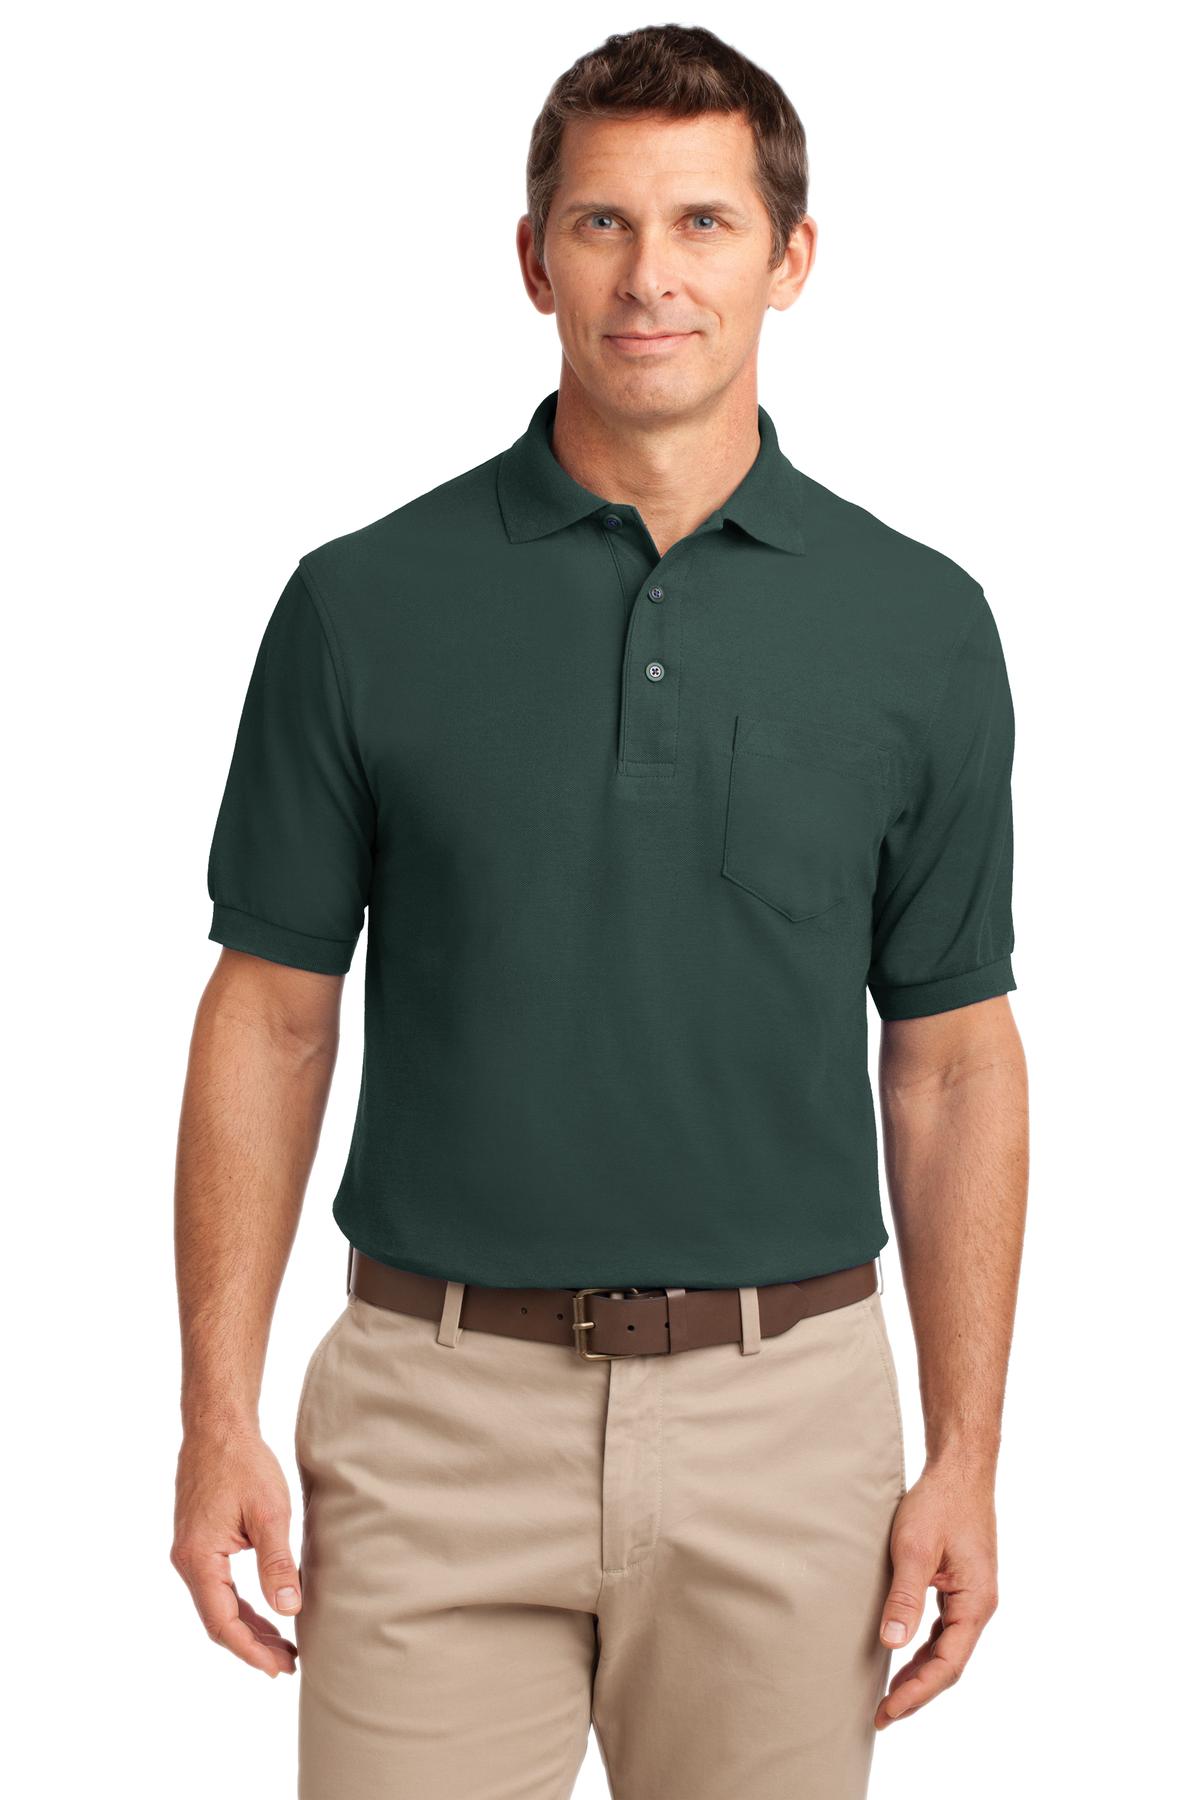 Joes USA Mens Classic Pocket Polo Shirts in Sizes XS-4XL